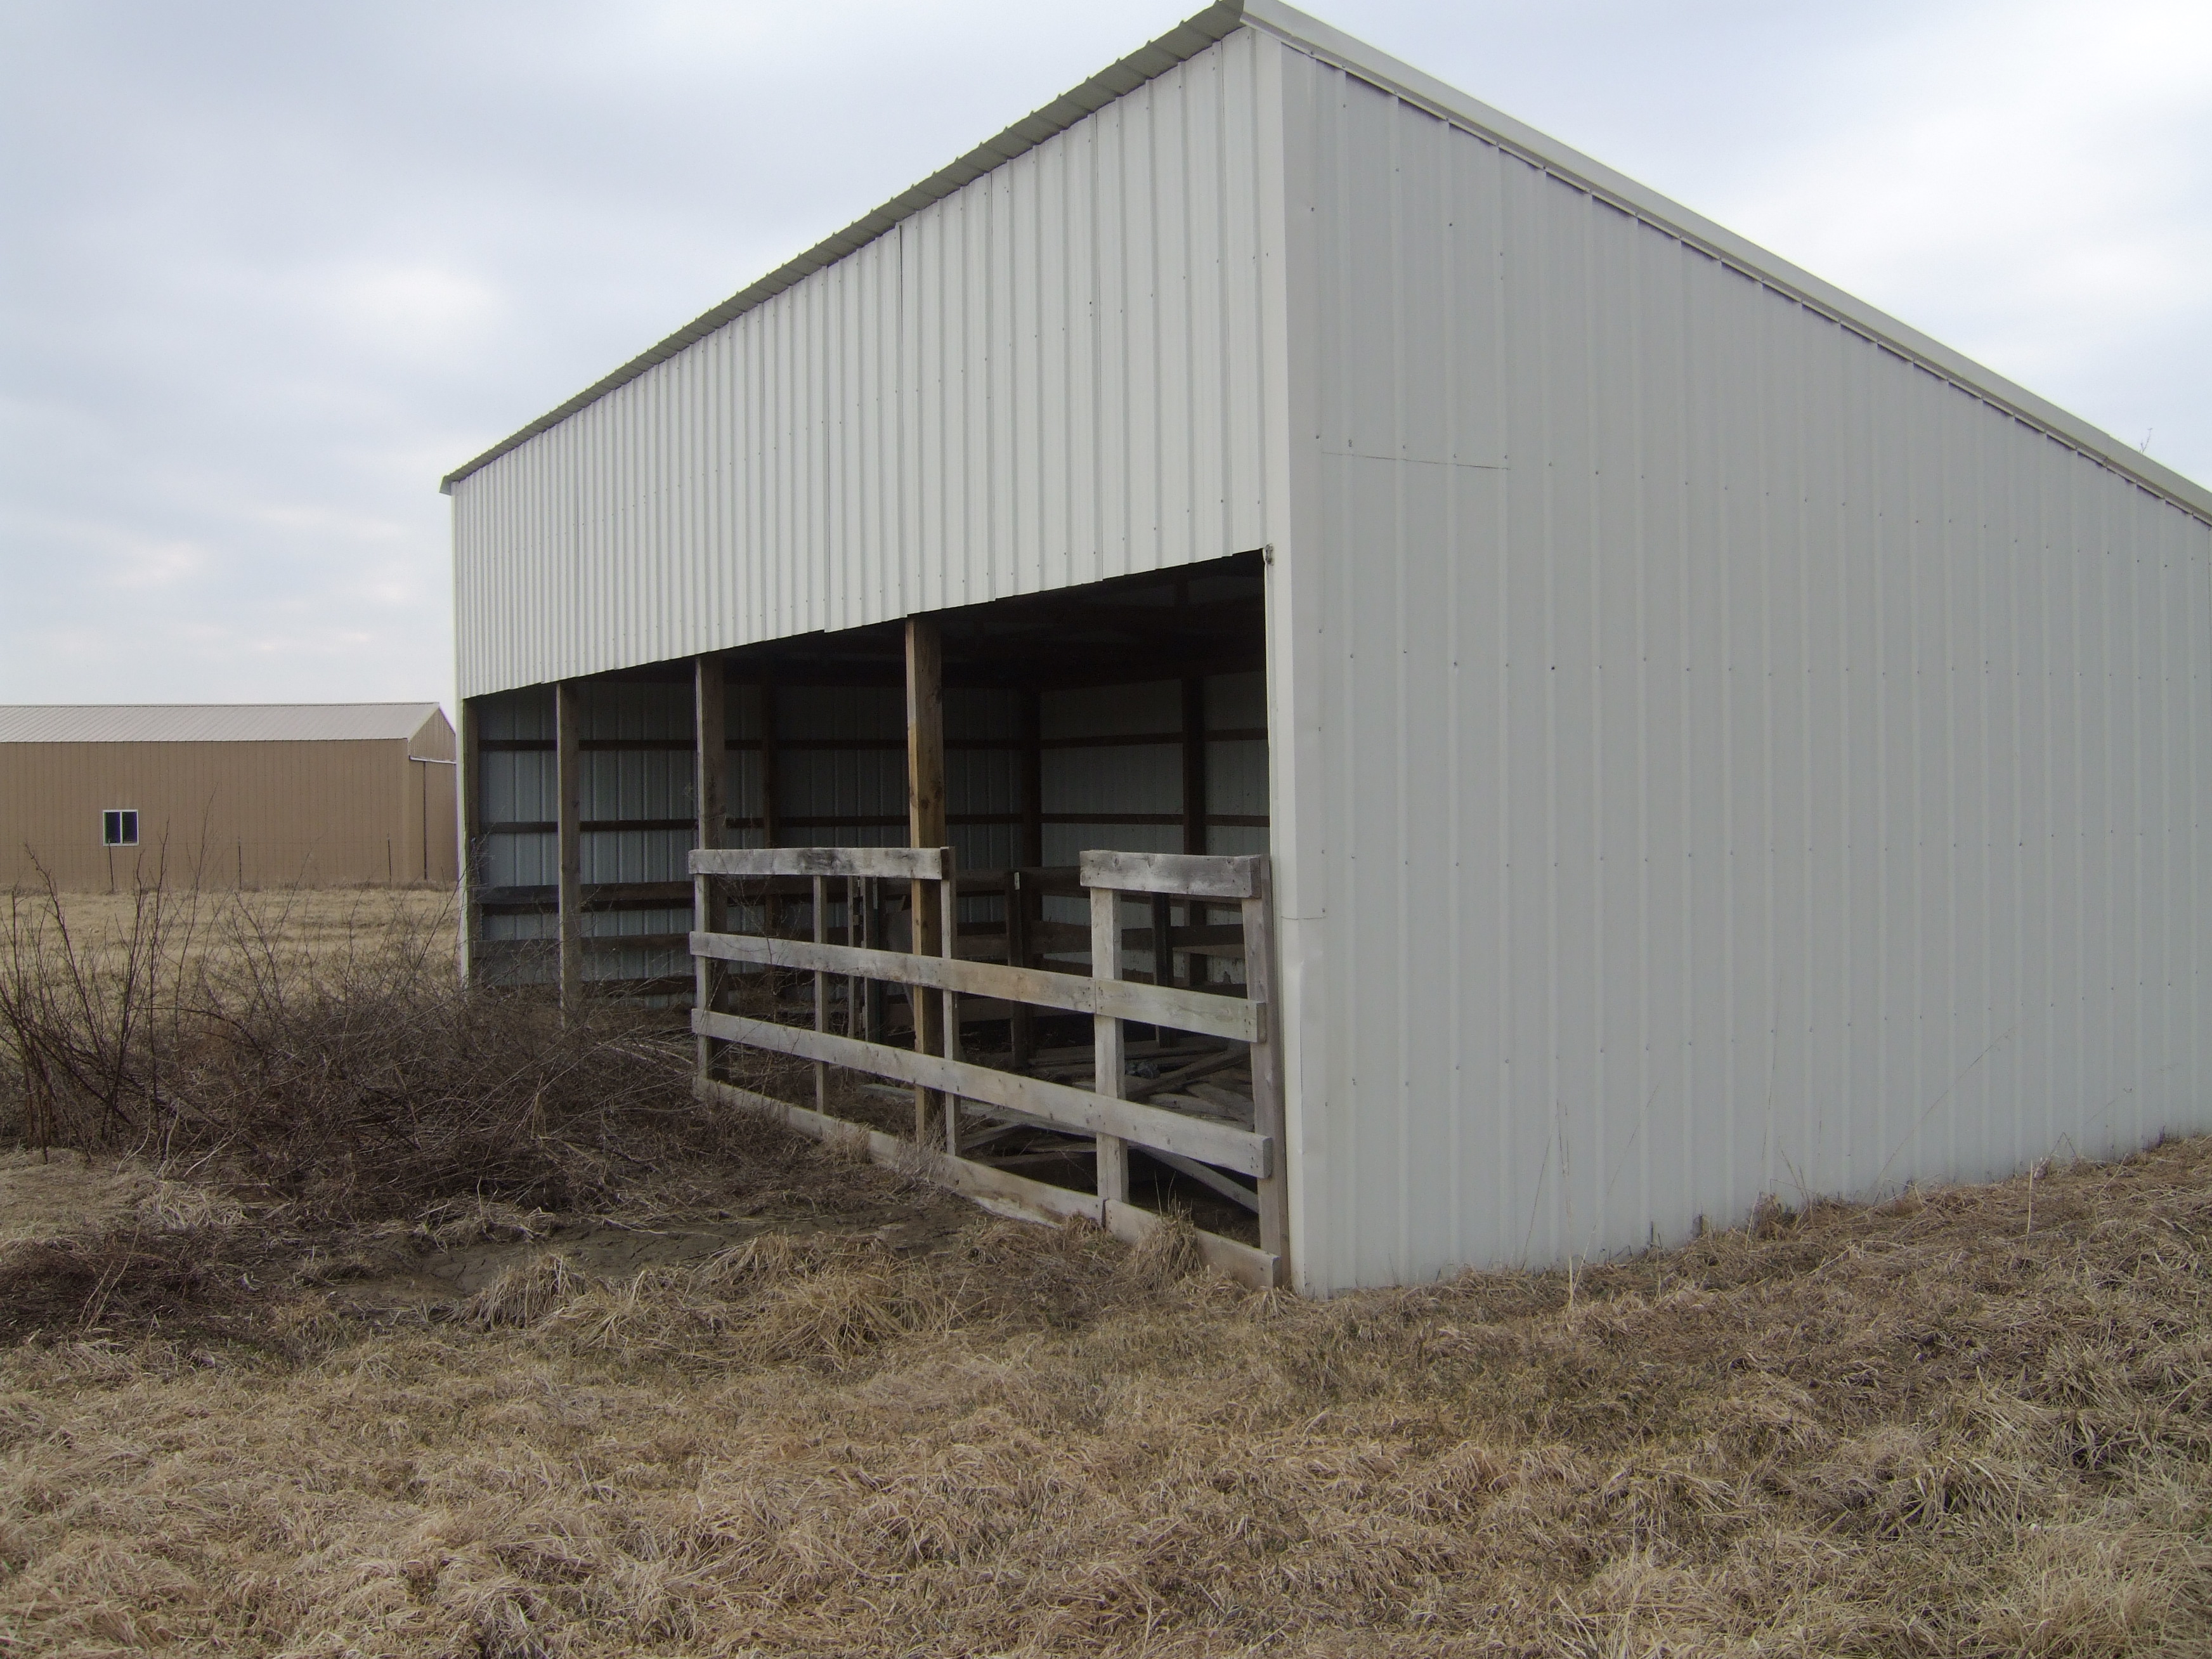 Best Place: How to build a small cattle shed